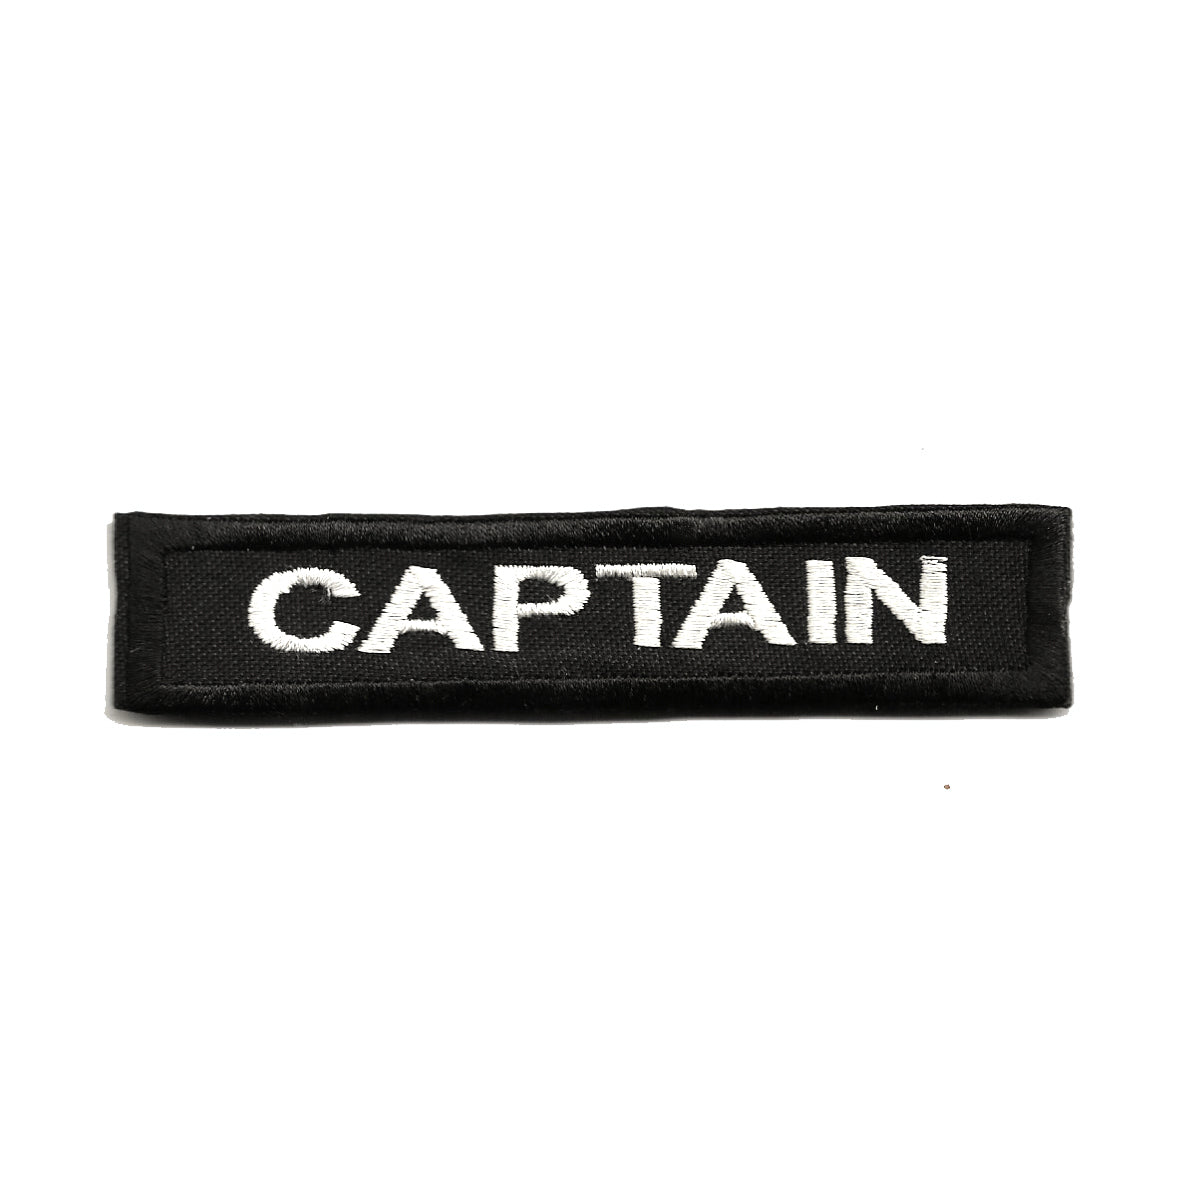 Captain Name Patch- 4.8 x 1 inches